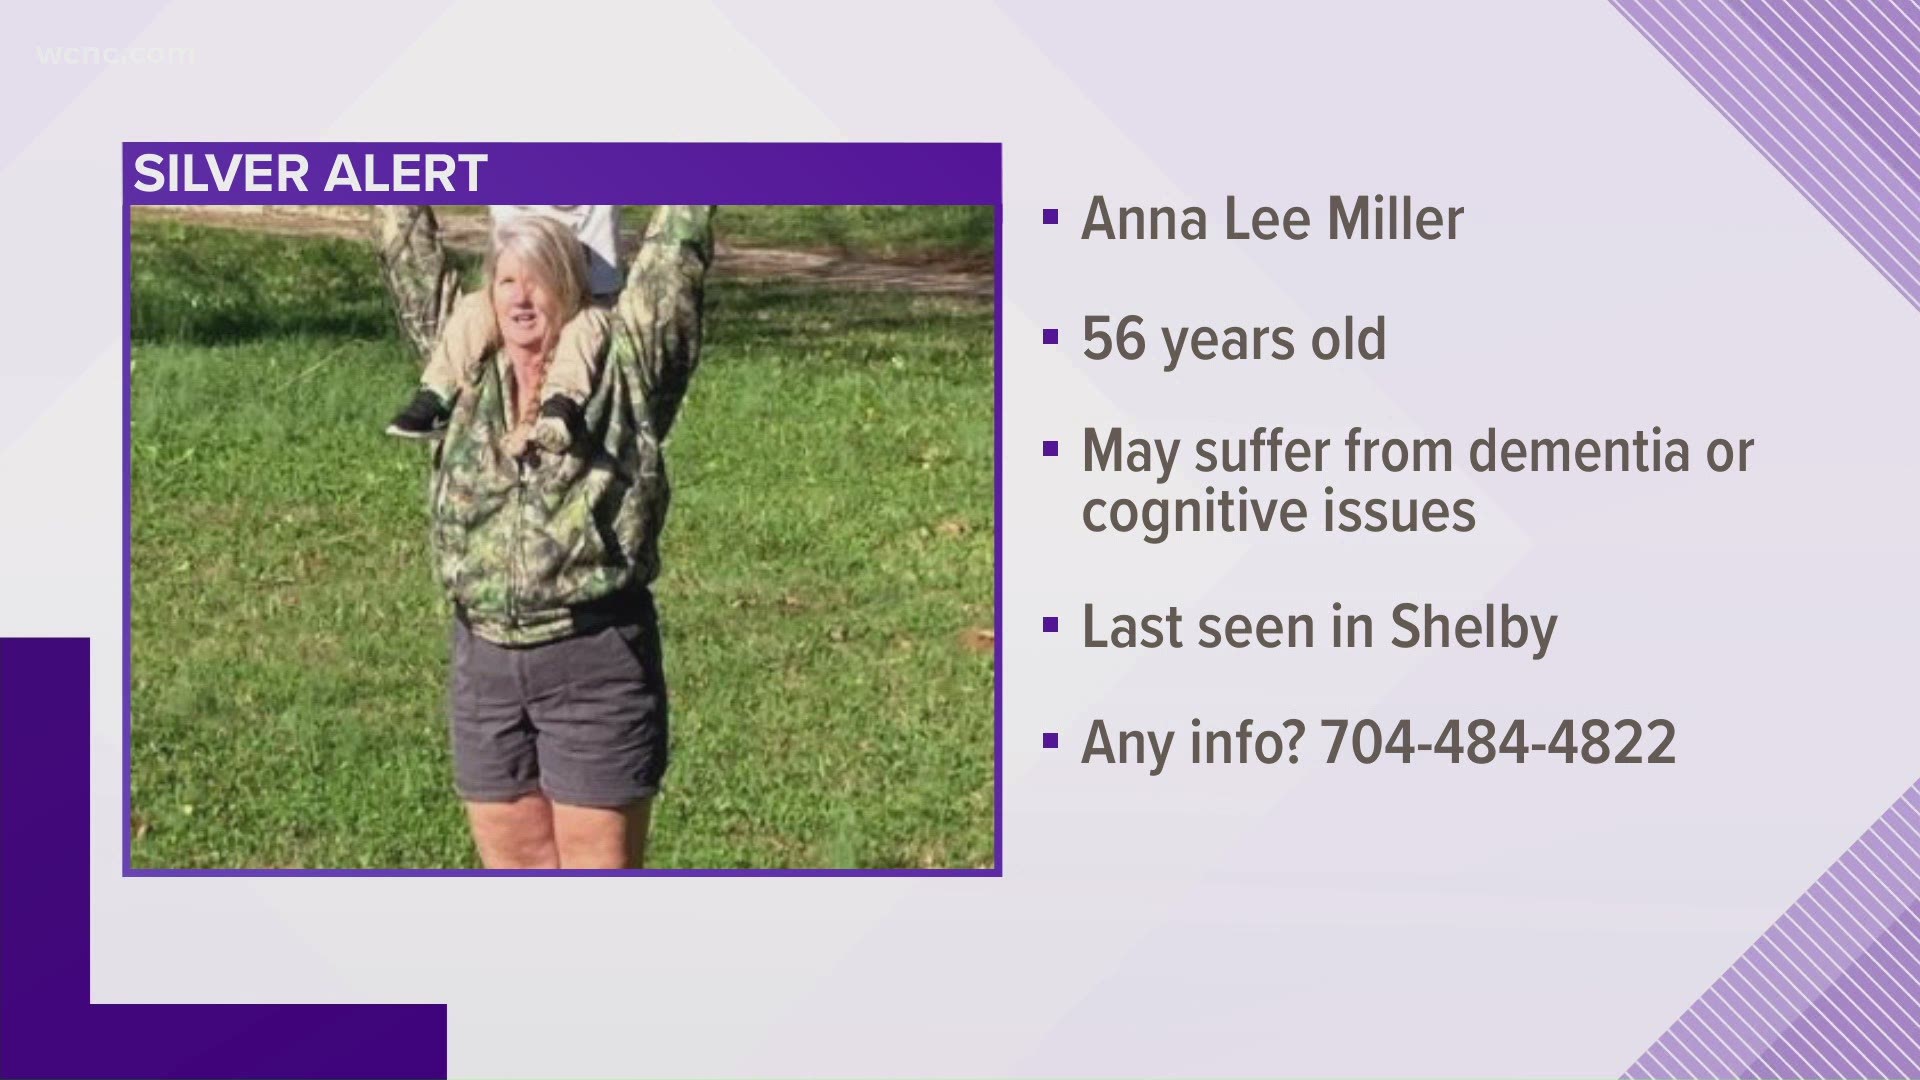 Officials are currently looking for 56-year-old Anna Lee Miller, who is believed to be suffering from dementia or some other cognitive impairment.